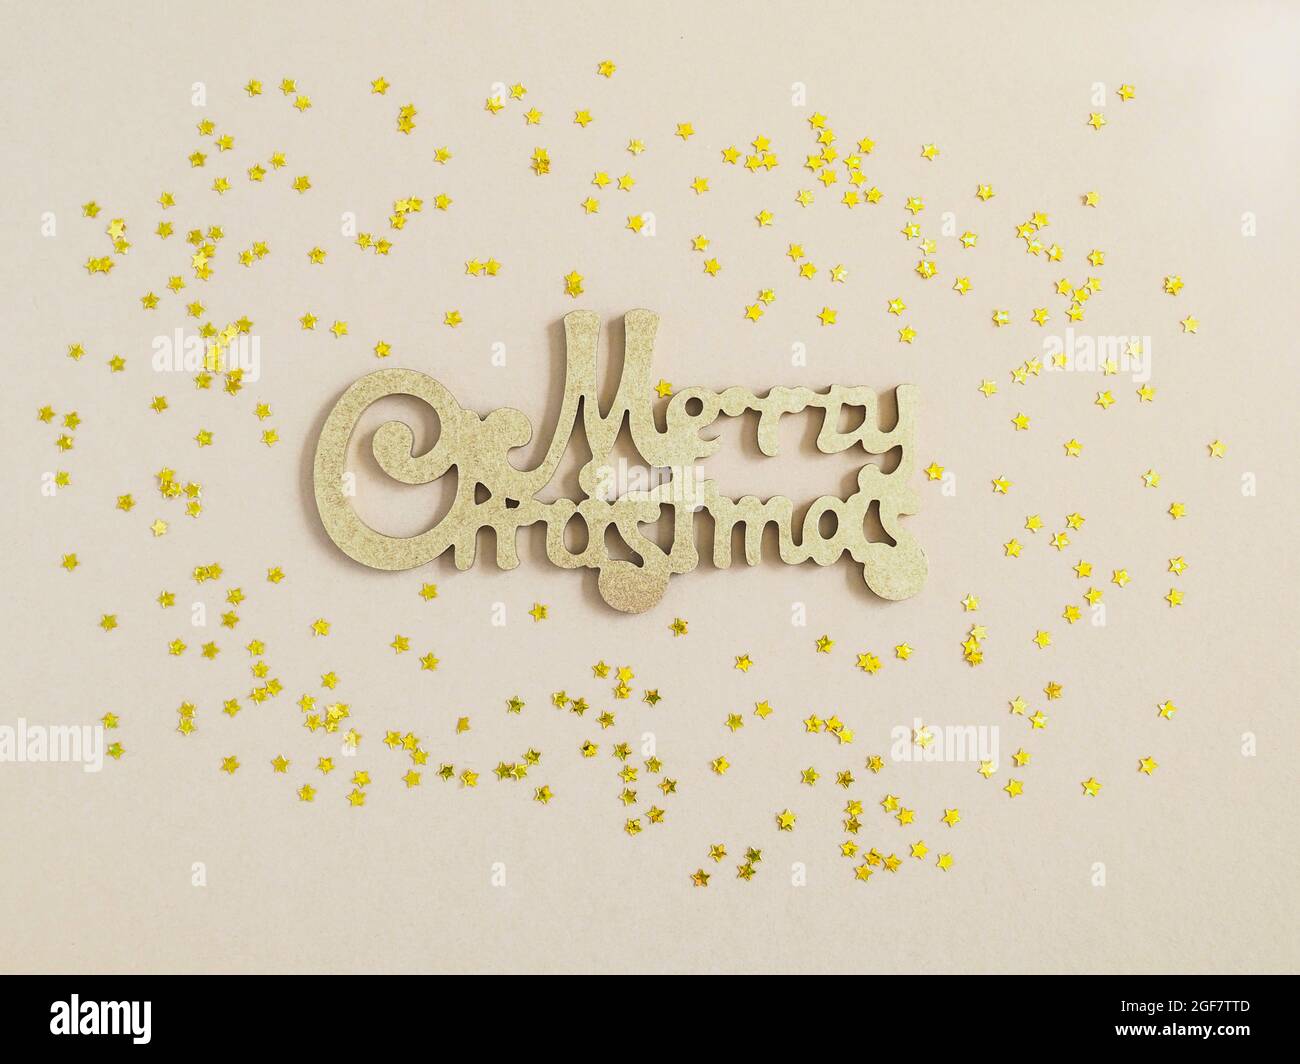 Merry Christmas gold greeting message and golden stars confetti on beige background. Top view. Bright Christmas greeting card. Stock Photo